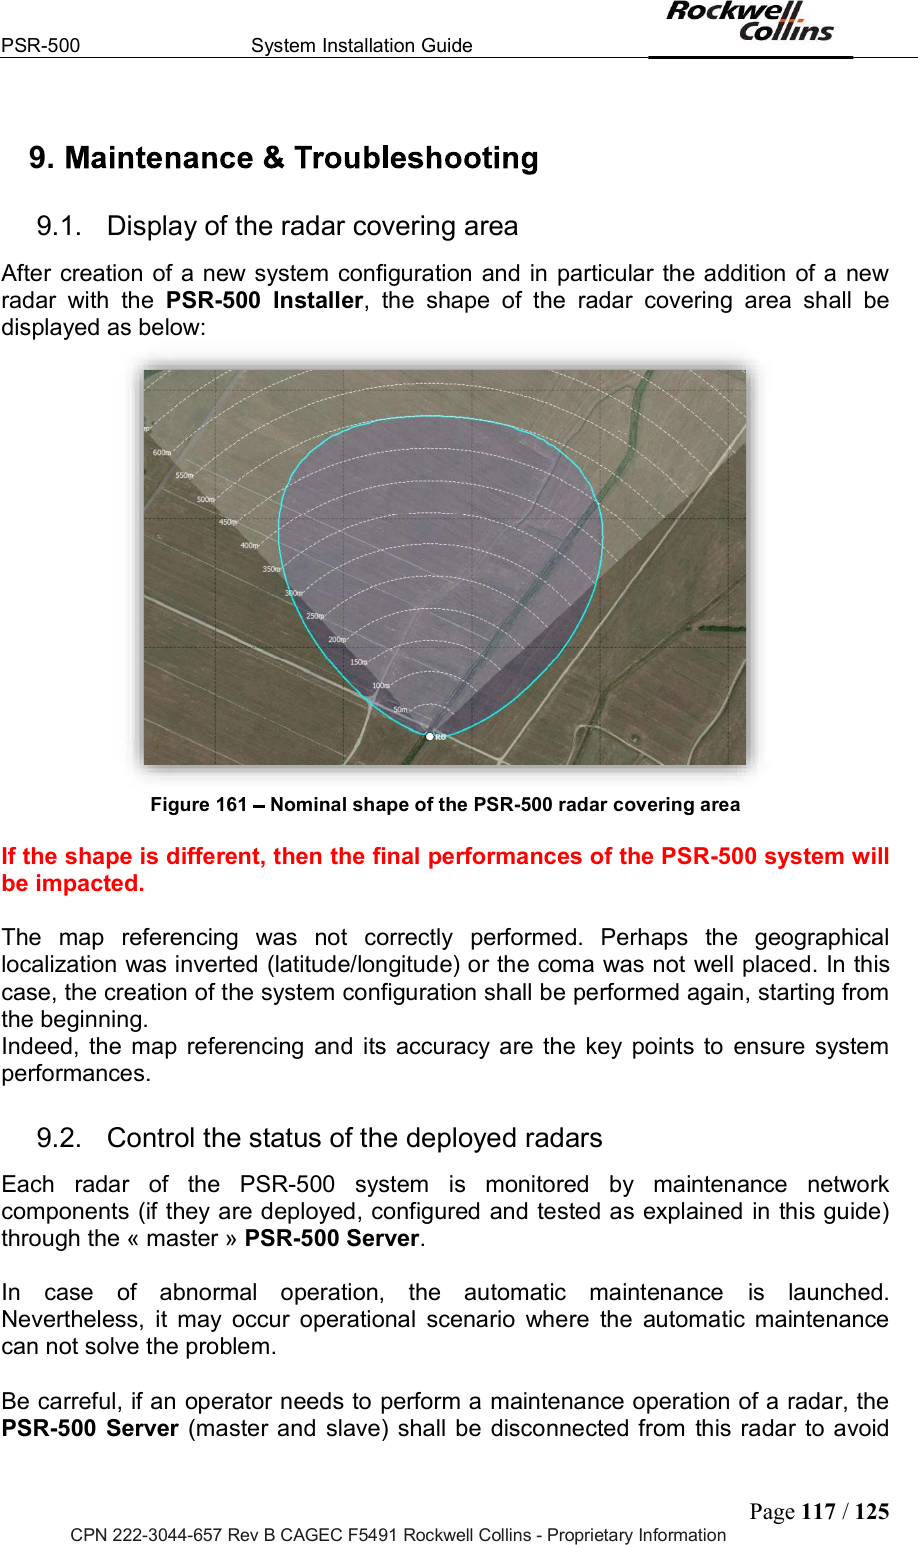 PSR-500  System Installation Guide  Page 117 / 125 CPN 222-3044-657 Rev B CAGEC F5491 Rockwell Collins - Proprietary Information 9.   9.1.  Display of the radar covering area After creation of a new system configuration and in particular the addition of a new radar  with  the  PSR-500  Installer,  the  shape  of  the  radar  covering  area  shall  be displayed as below:  Figure 161   Nominal shape of the PSR-500 radar covering area   If the shape is different, then the final performances of the PSR-500 system will be impacted.  The  map  referencing  was  not  correctly  performed.  Perhaps  the  geographical localization was inverted (latitude/longitude) or the coma was not well placed. In this case, the creation of the system configuration shall be performed again, starting from the beginning. Indeed, the map referencing and  its accuracy are the key points to  ensure system performances. 9.2.  Control the status of the deployed radars Each  radar  of  the  PSR-500  system  is  monitored  by  maintenance  network components (if they are deployed, configured and tested as explained in this guide) through the « master » PSR-500 Server.  In  case  of  abnormal  operation,  the  automatic  maintenance  is  launched. Nevertheless,  it  may  occur  operational  scenario  where  the  automatic  maintenance can not solve the problem.   Be carreful, if an operator needs to perform a maintenance operation of a radar, the PSR-500  Server (master and slave) shall be disconnected from this radar to avoid 